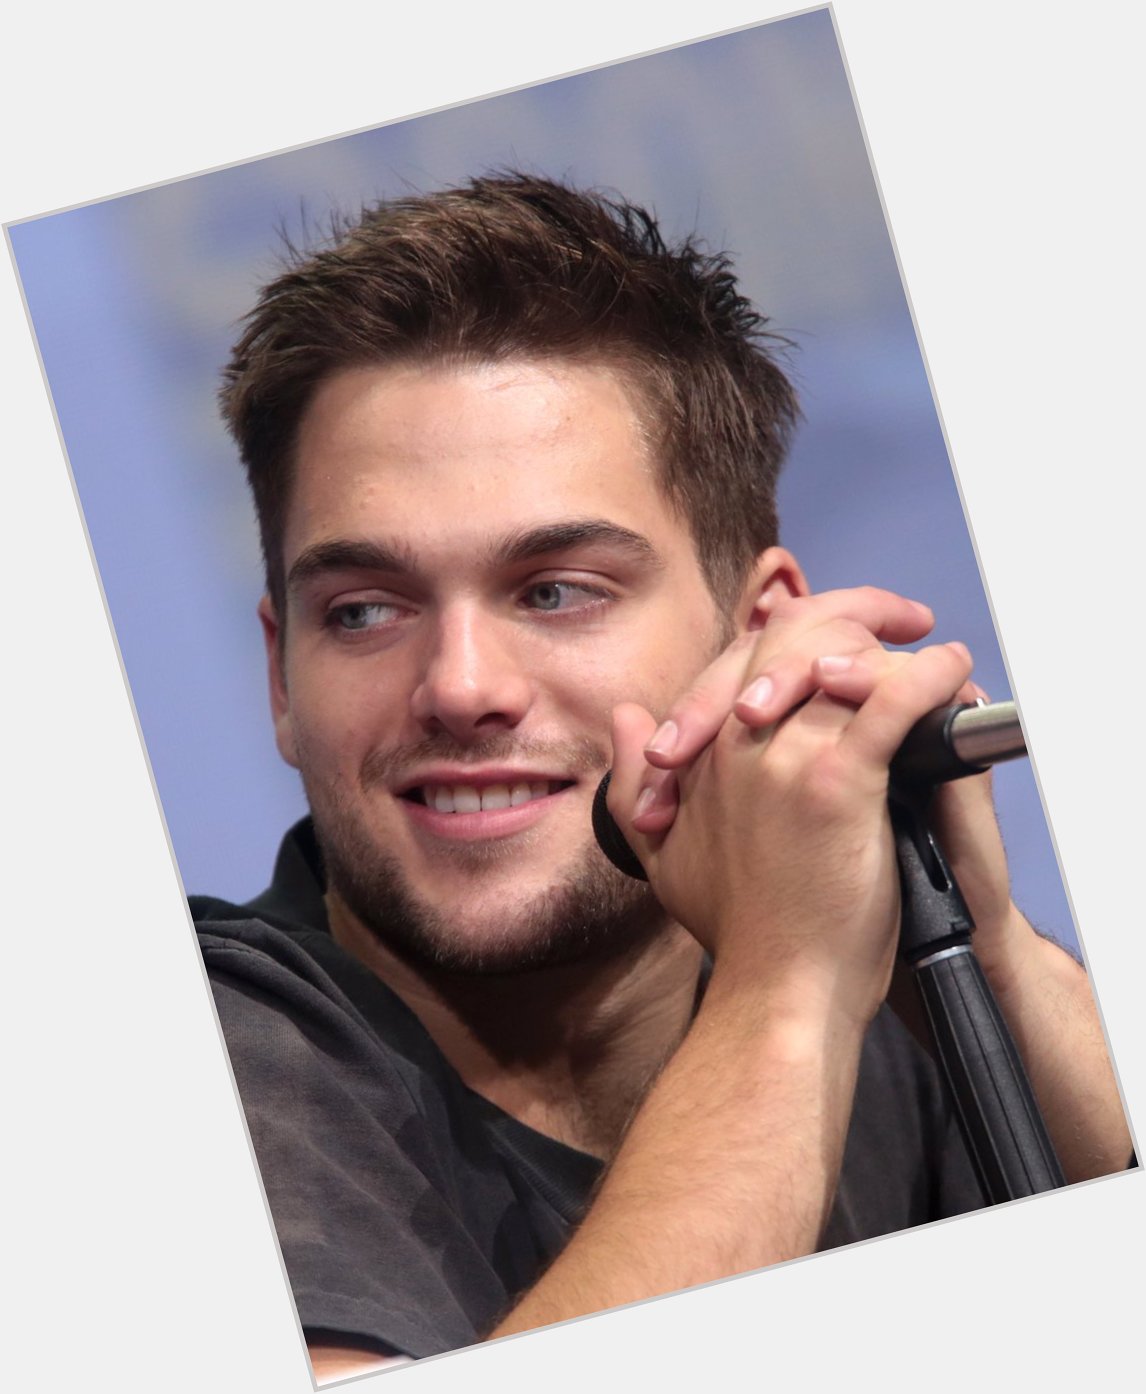 Happy Birthday to Dylan Sprayberry hope 22 treats you well   